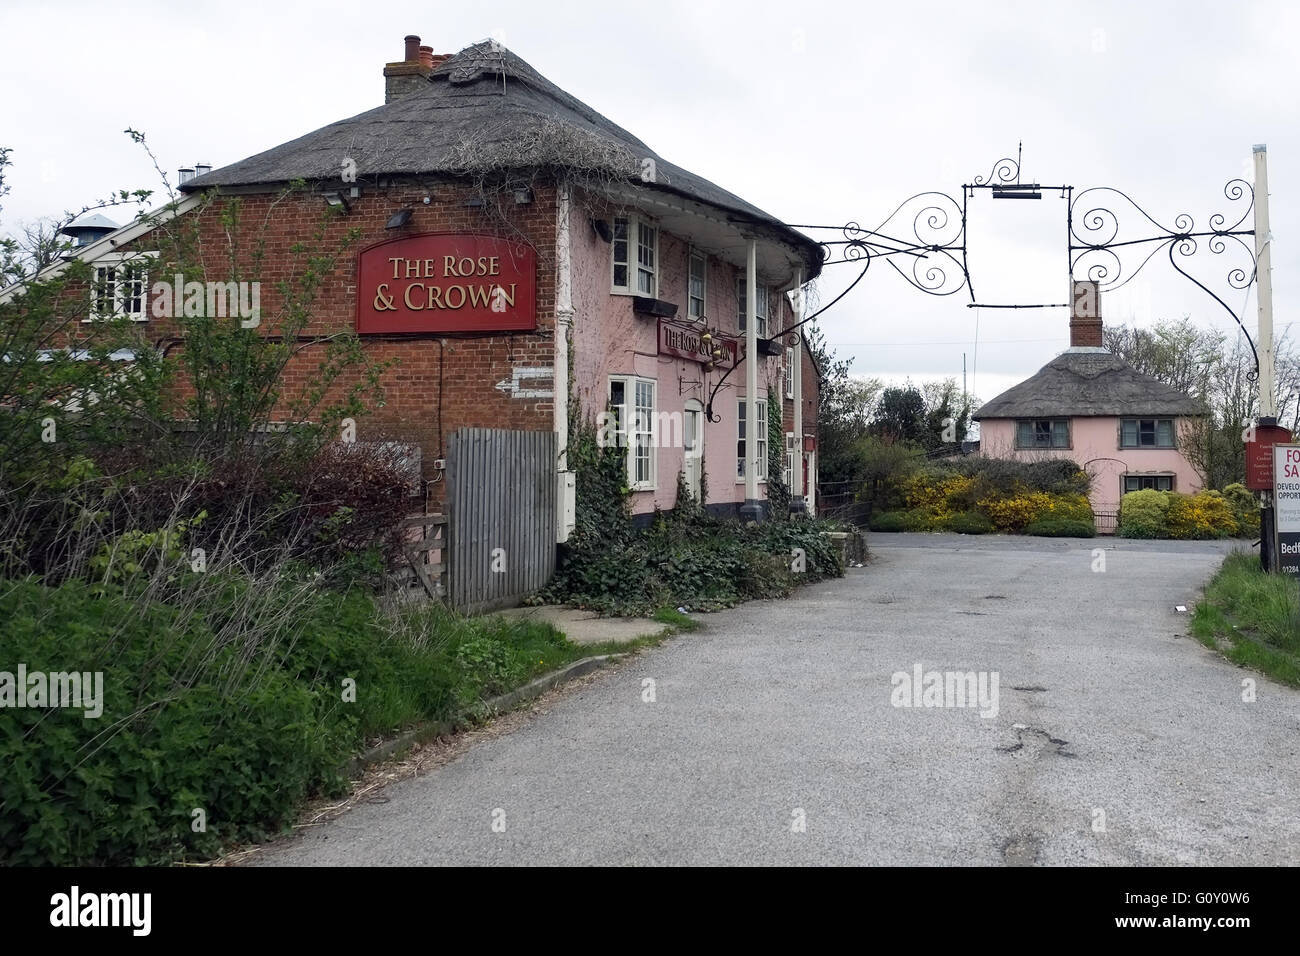 The abandoned Rose & Crown Pub, Stanton, Suffolk, England, UK. Stock Photo